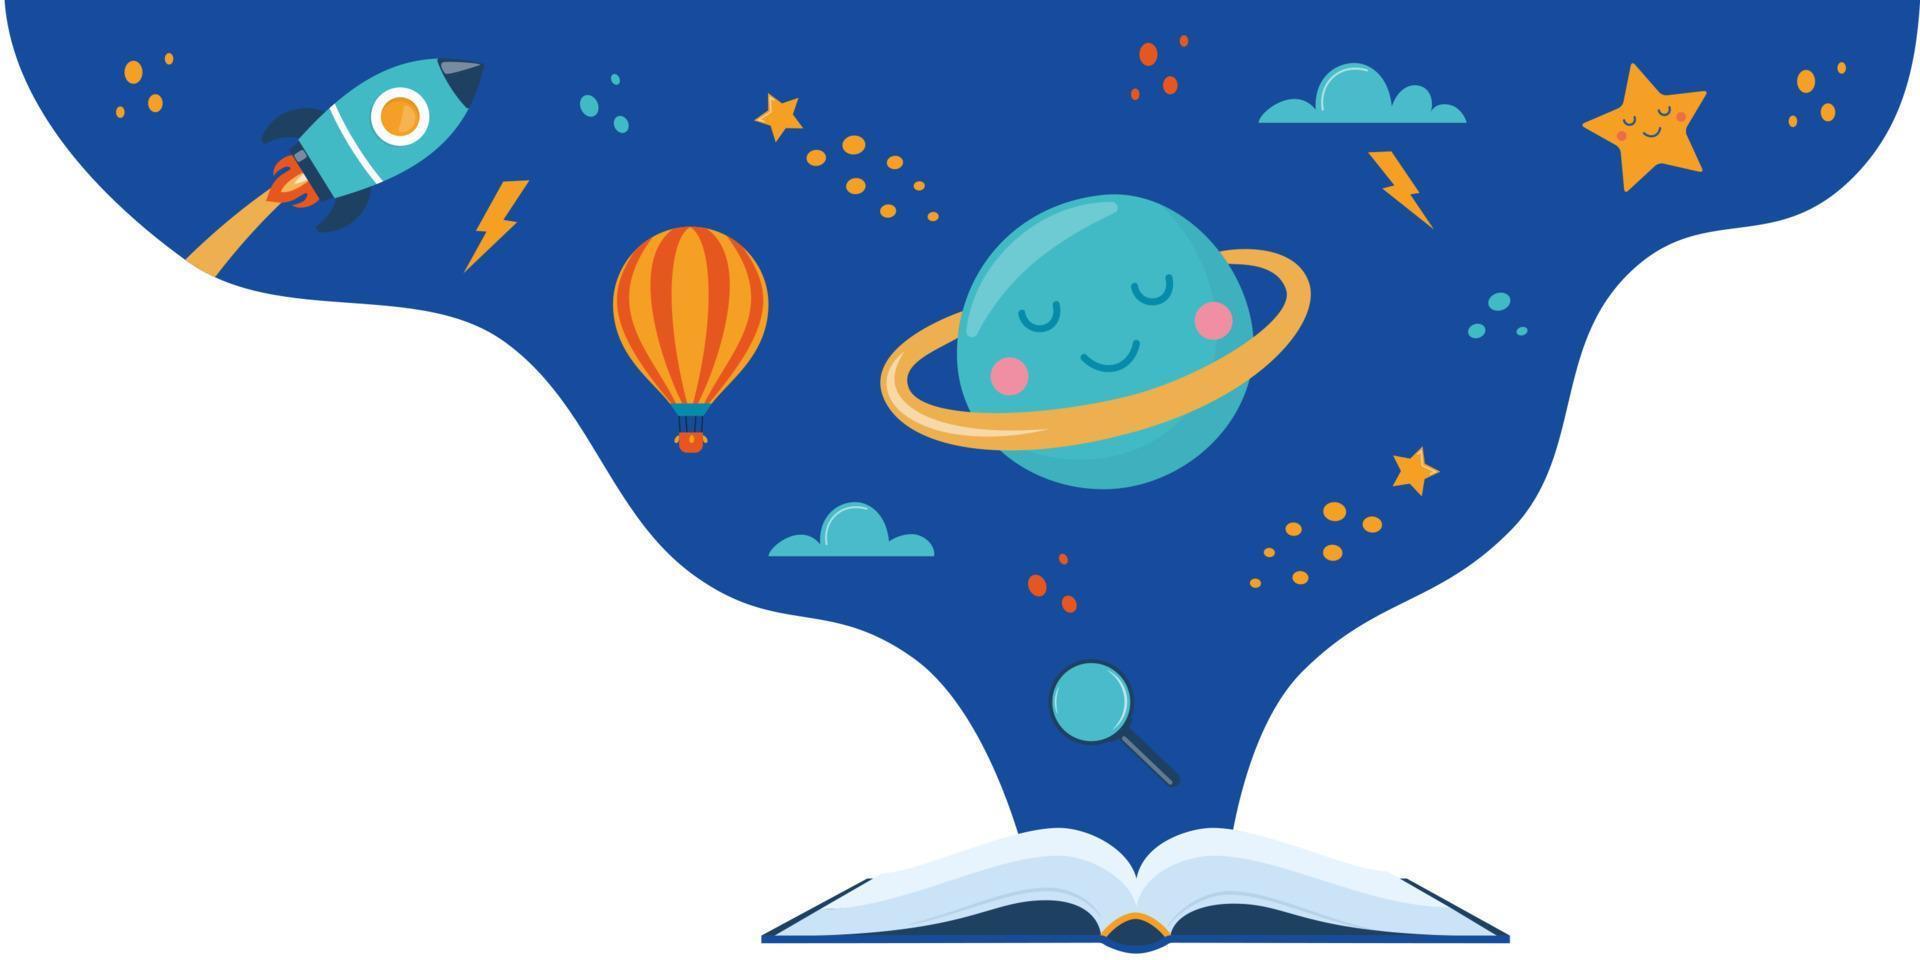 Open book and space elements. Planet, rocket, star, cloud, aerostat. Education concept for kids. Knowledge, creativity, discoveries. Design for educational motivational banner. Back to school. Vector. vector